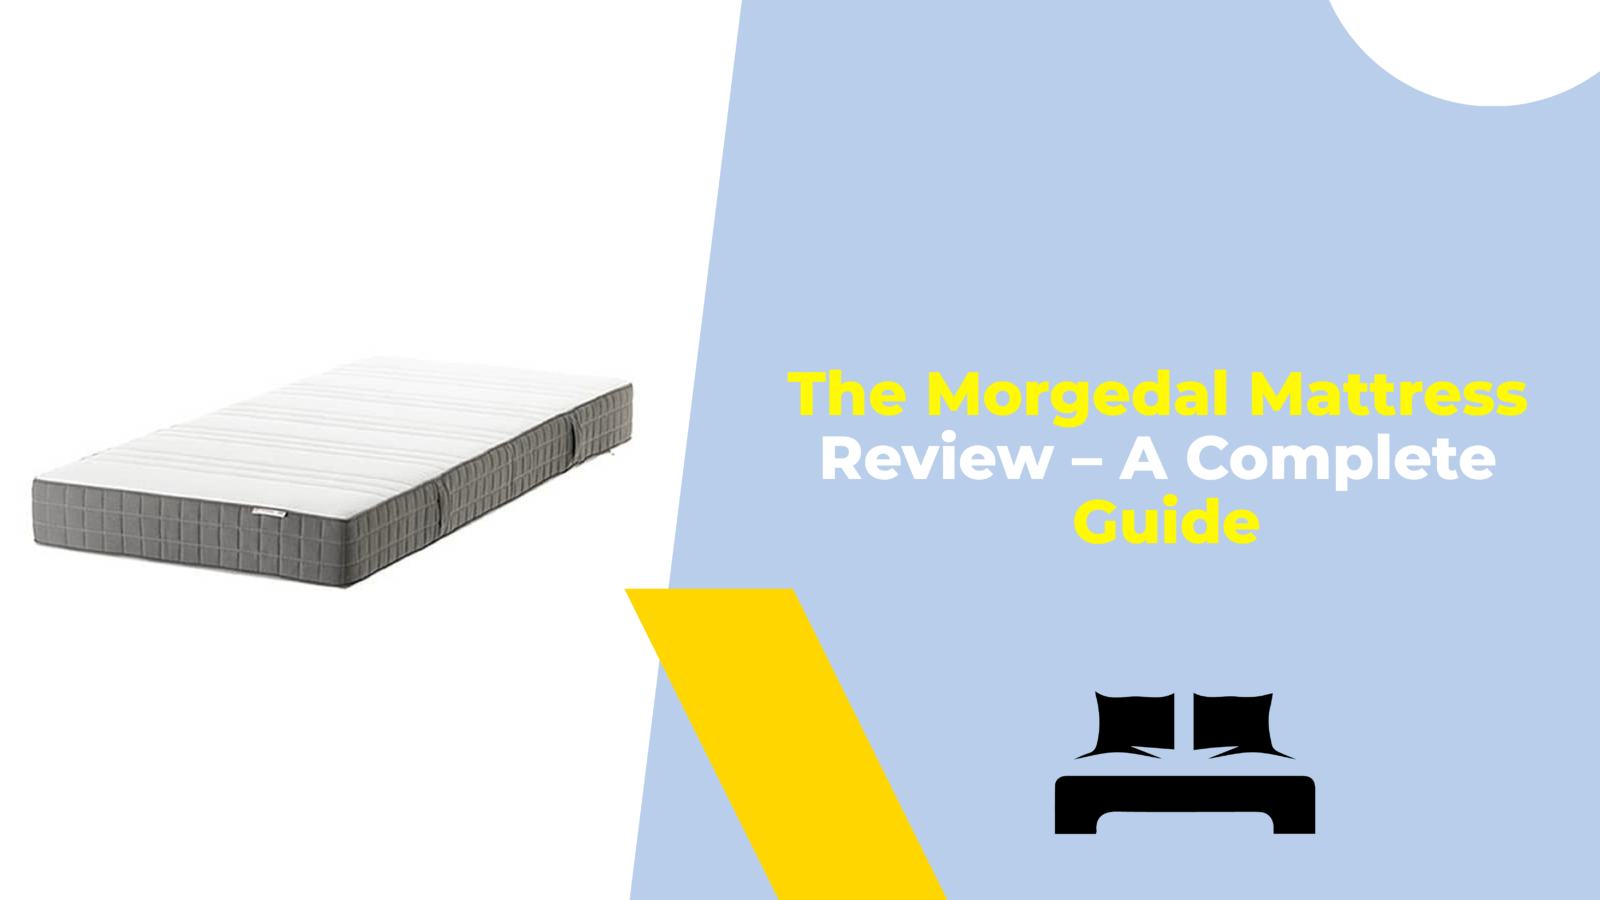 The Morgedal Mattress Review – A Complete Guide